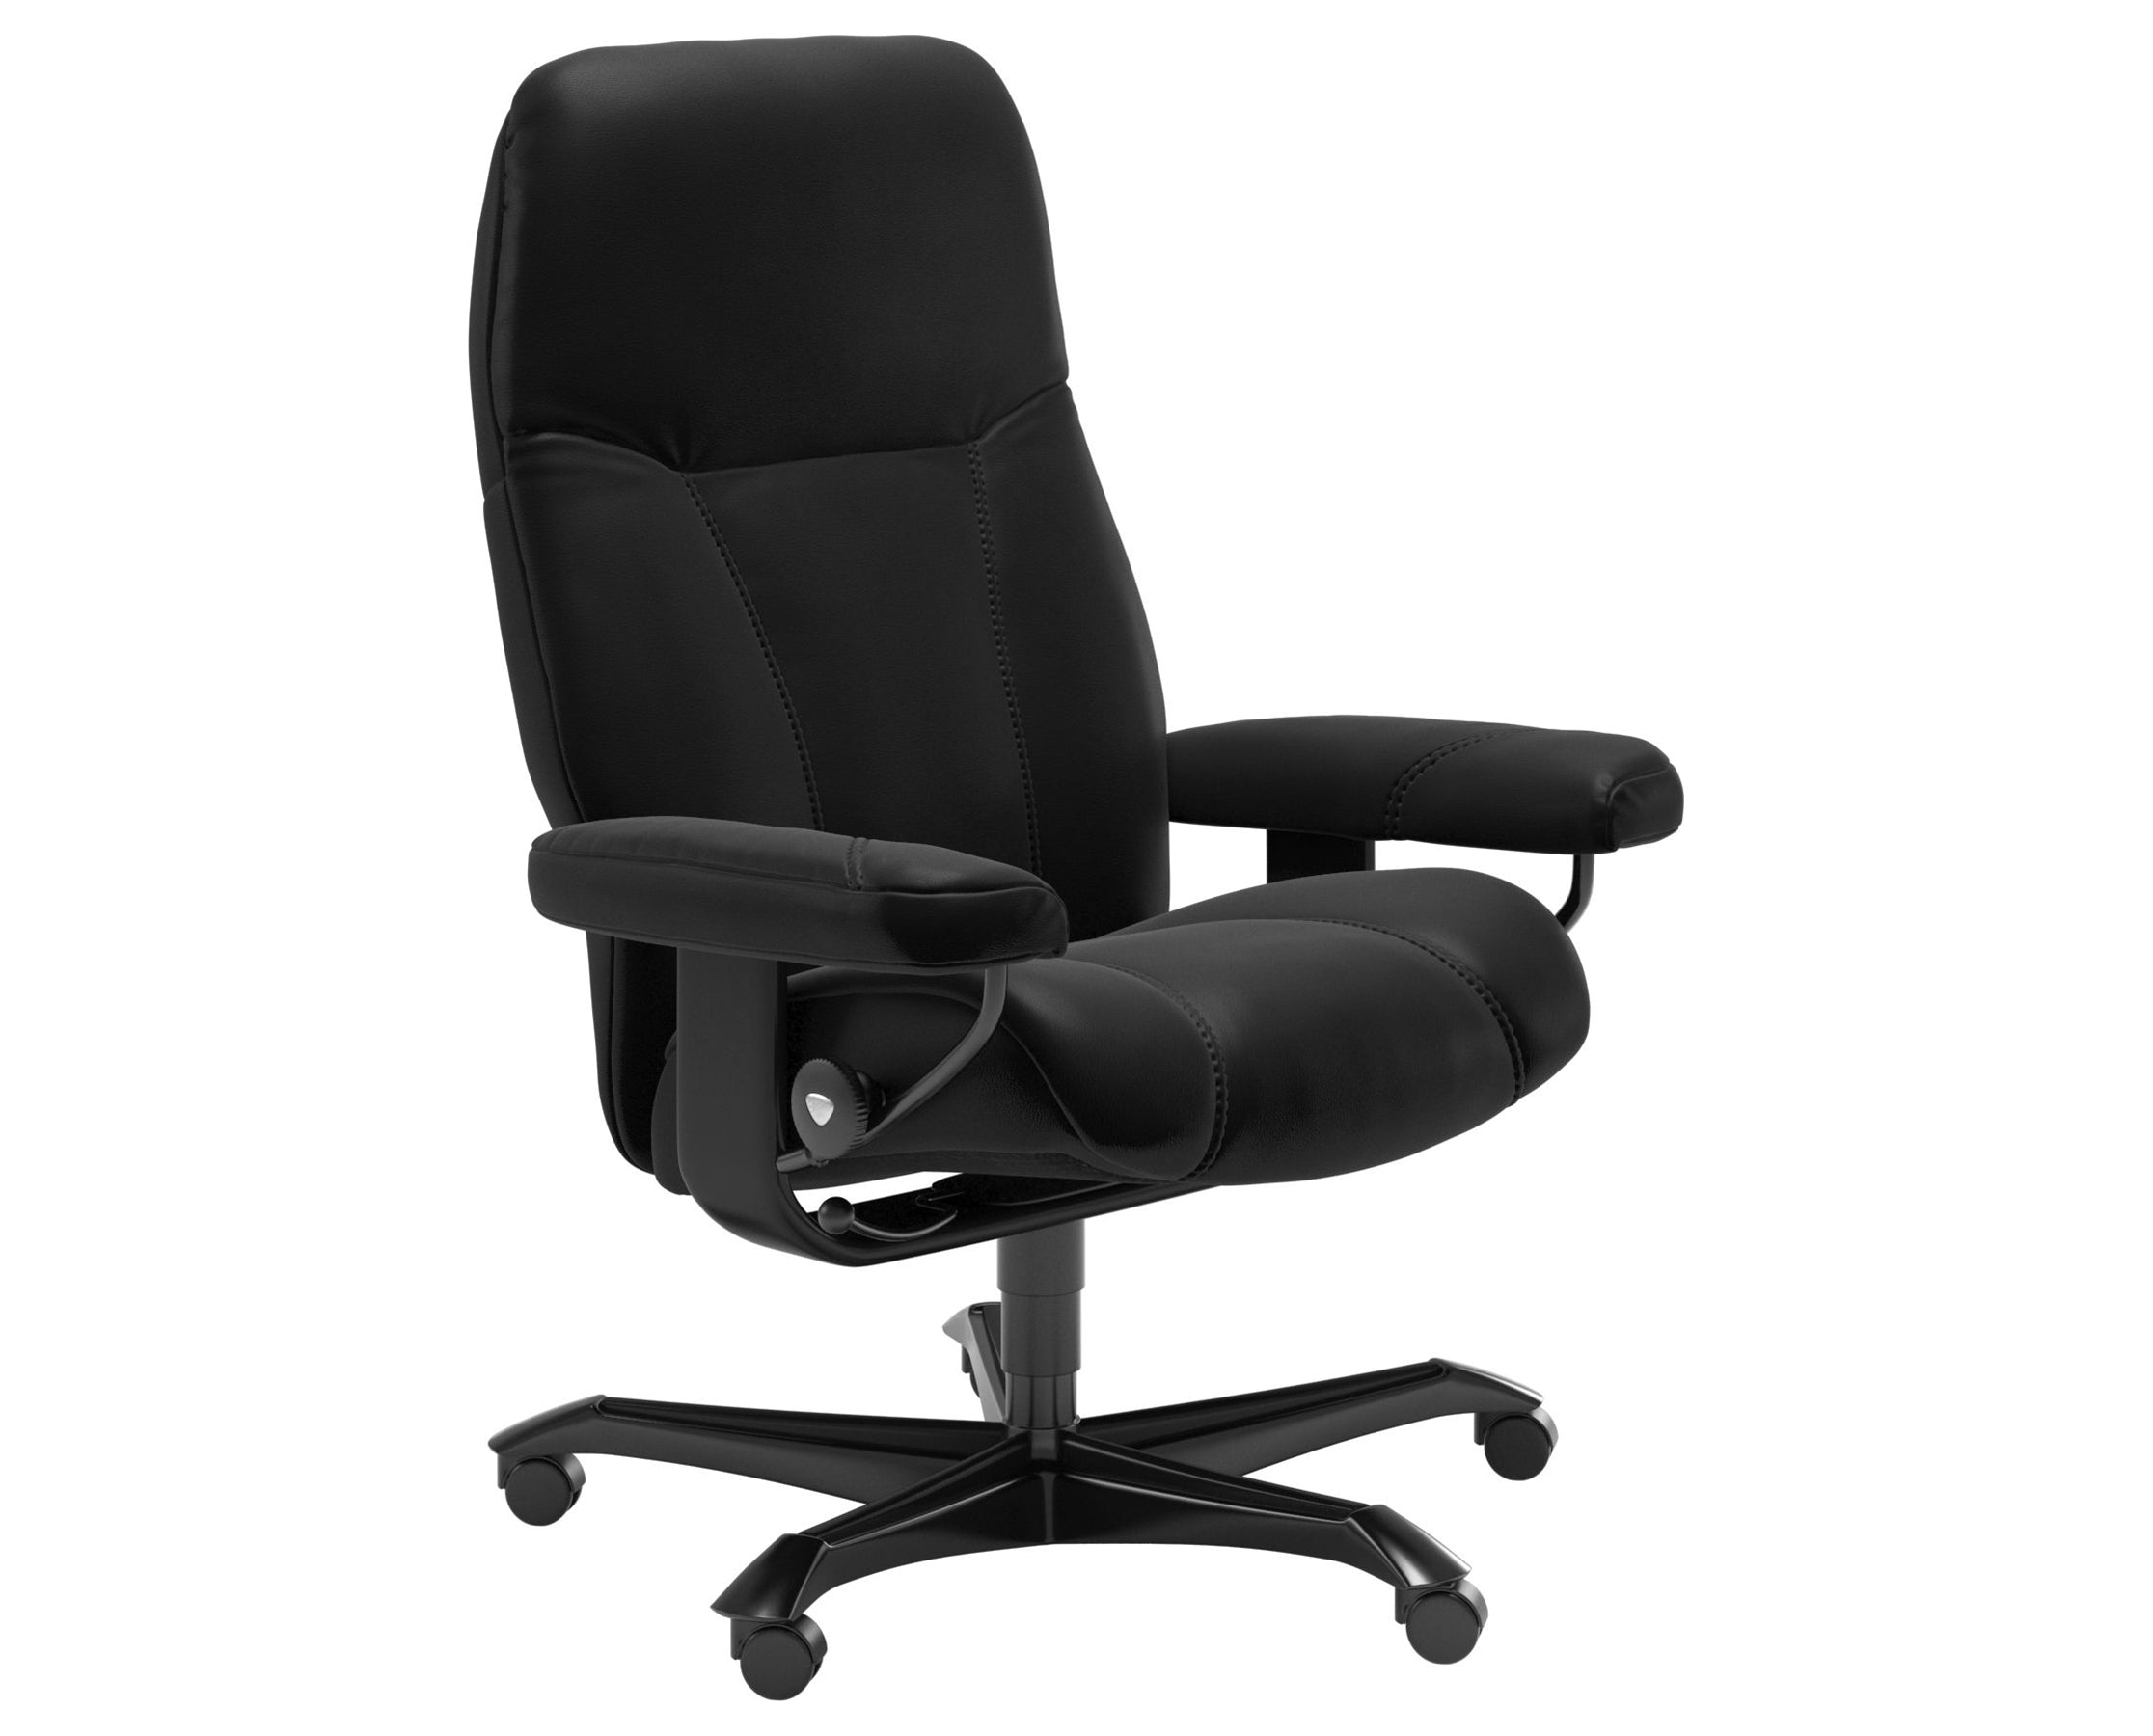 Batick Leather Black M and Black Base | Stressless Consul Home Office Chair | Valley Ridge Furniture